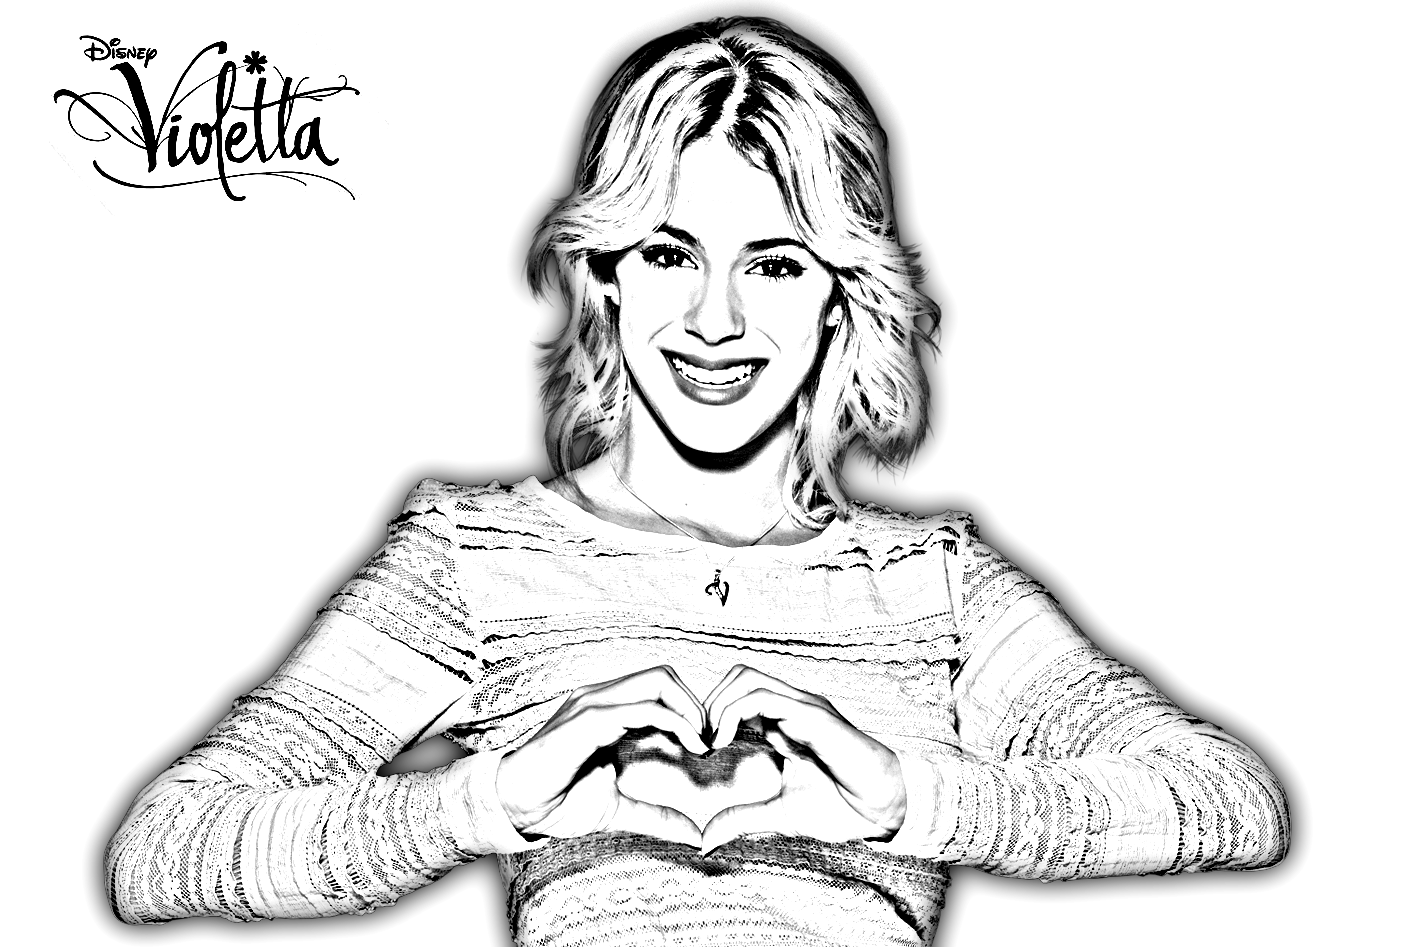 Martina Stoessel blonde! And yes for season 3, Violetta changes everything!